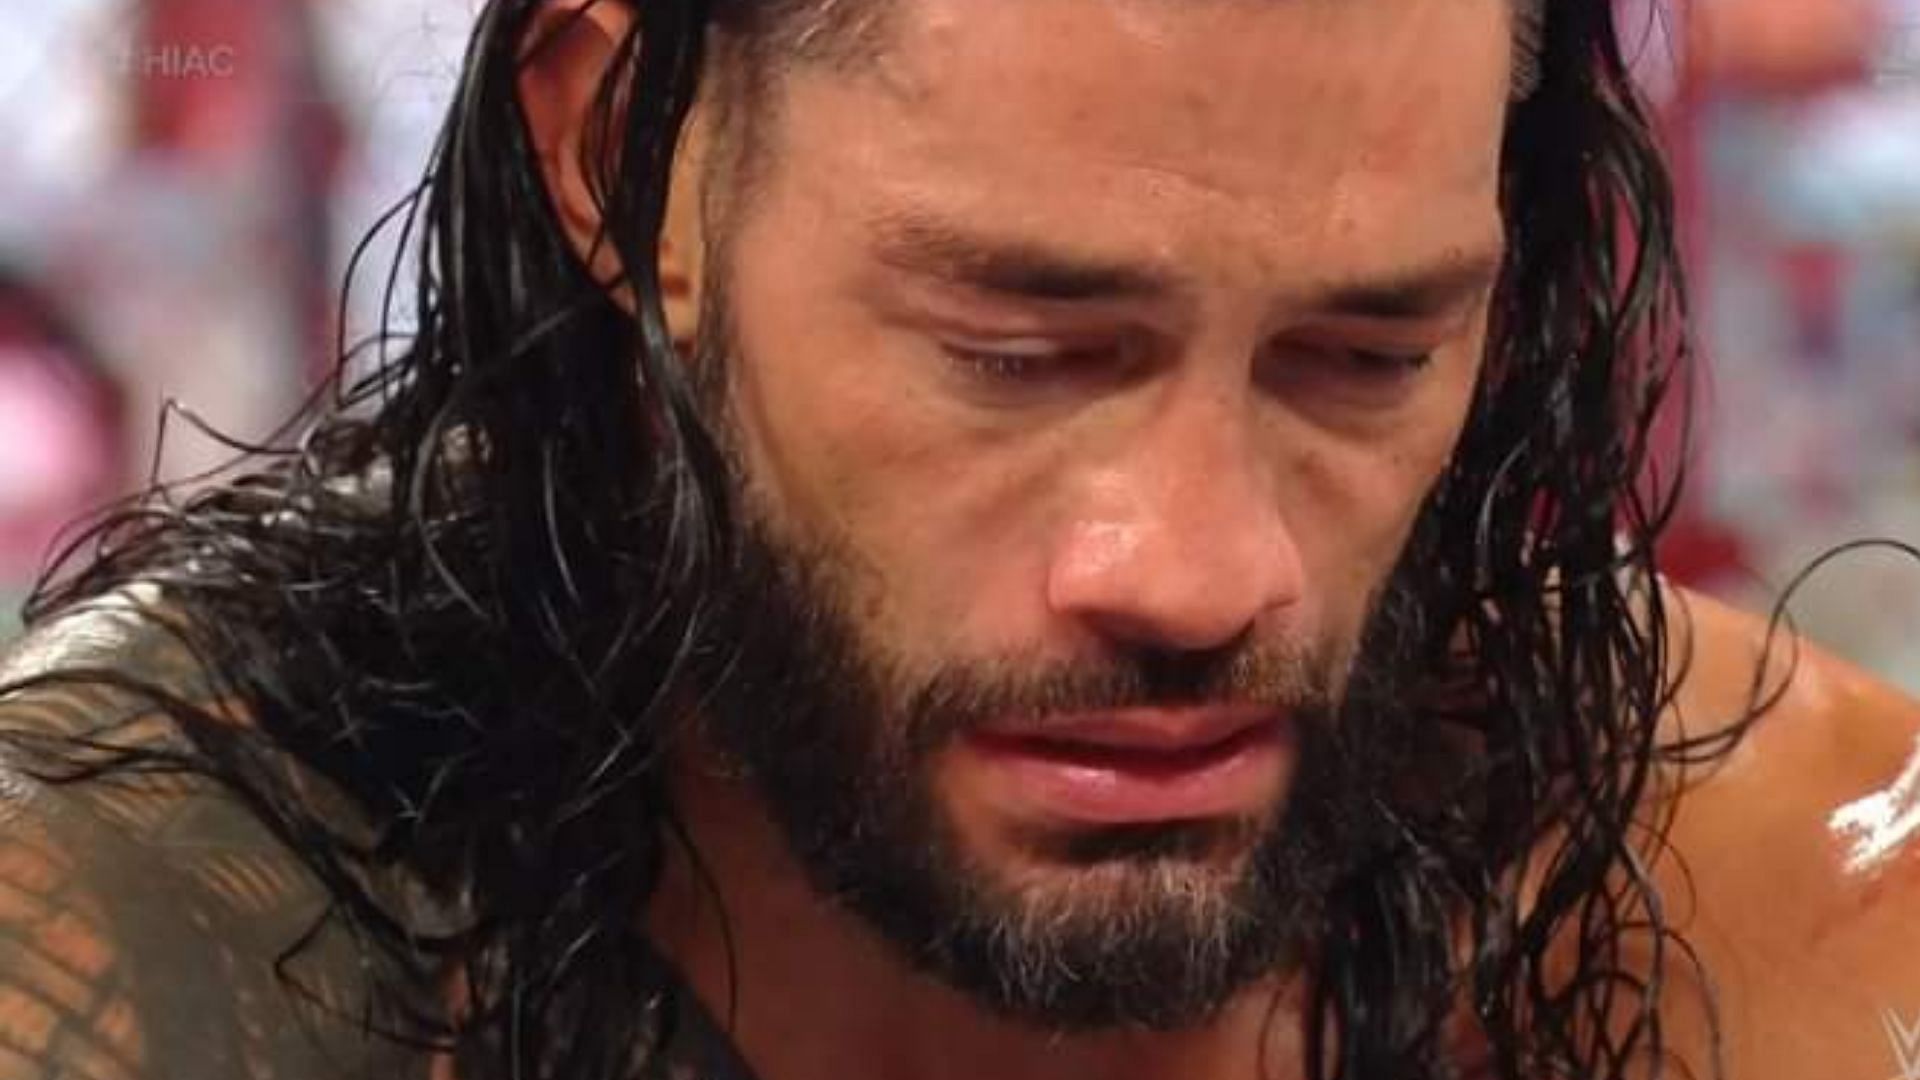 Roman Reigns has been the dominant champion for years in WWE